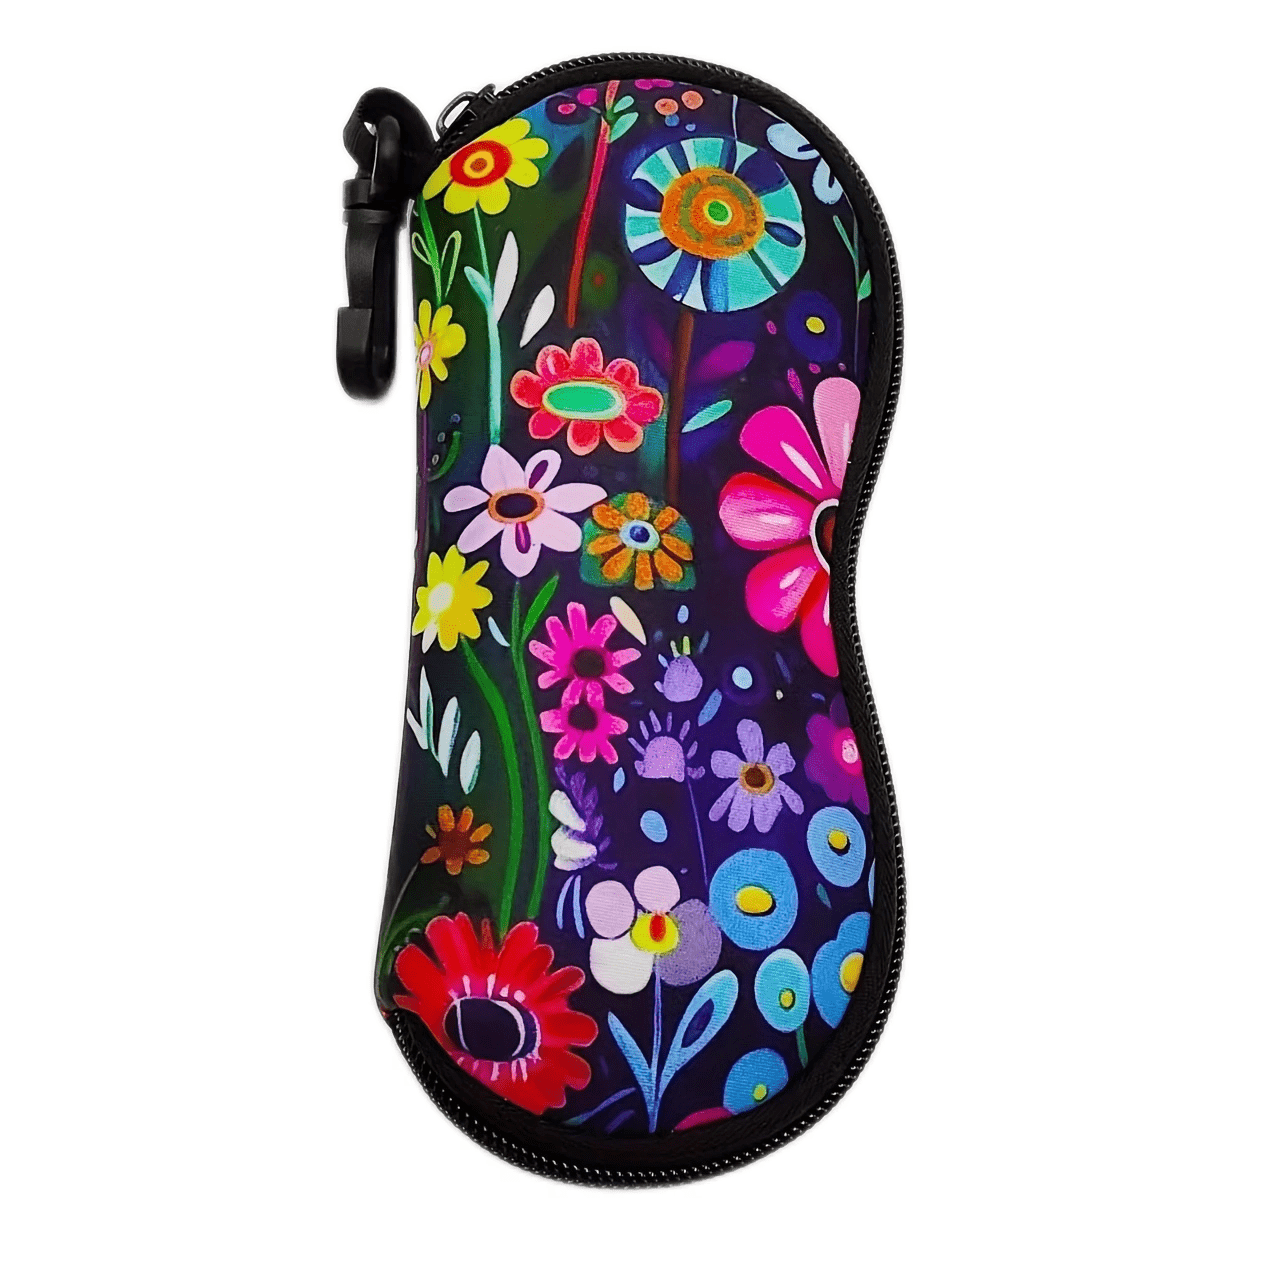 

Chic Floral Sea Pattern Zippered Fashion Glasses Case - Lightweight, Waterproof Neoprene, Multi-use For Glasses & Accessories, Unisex